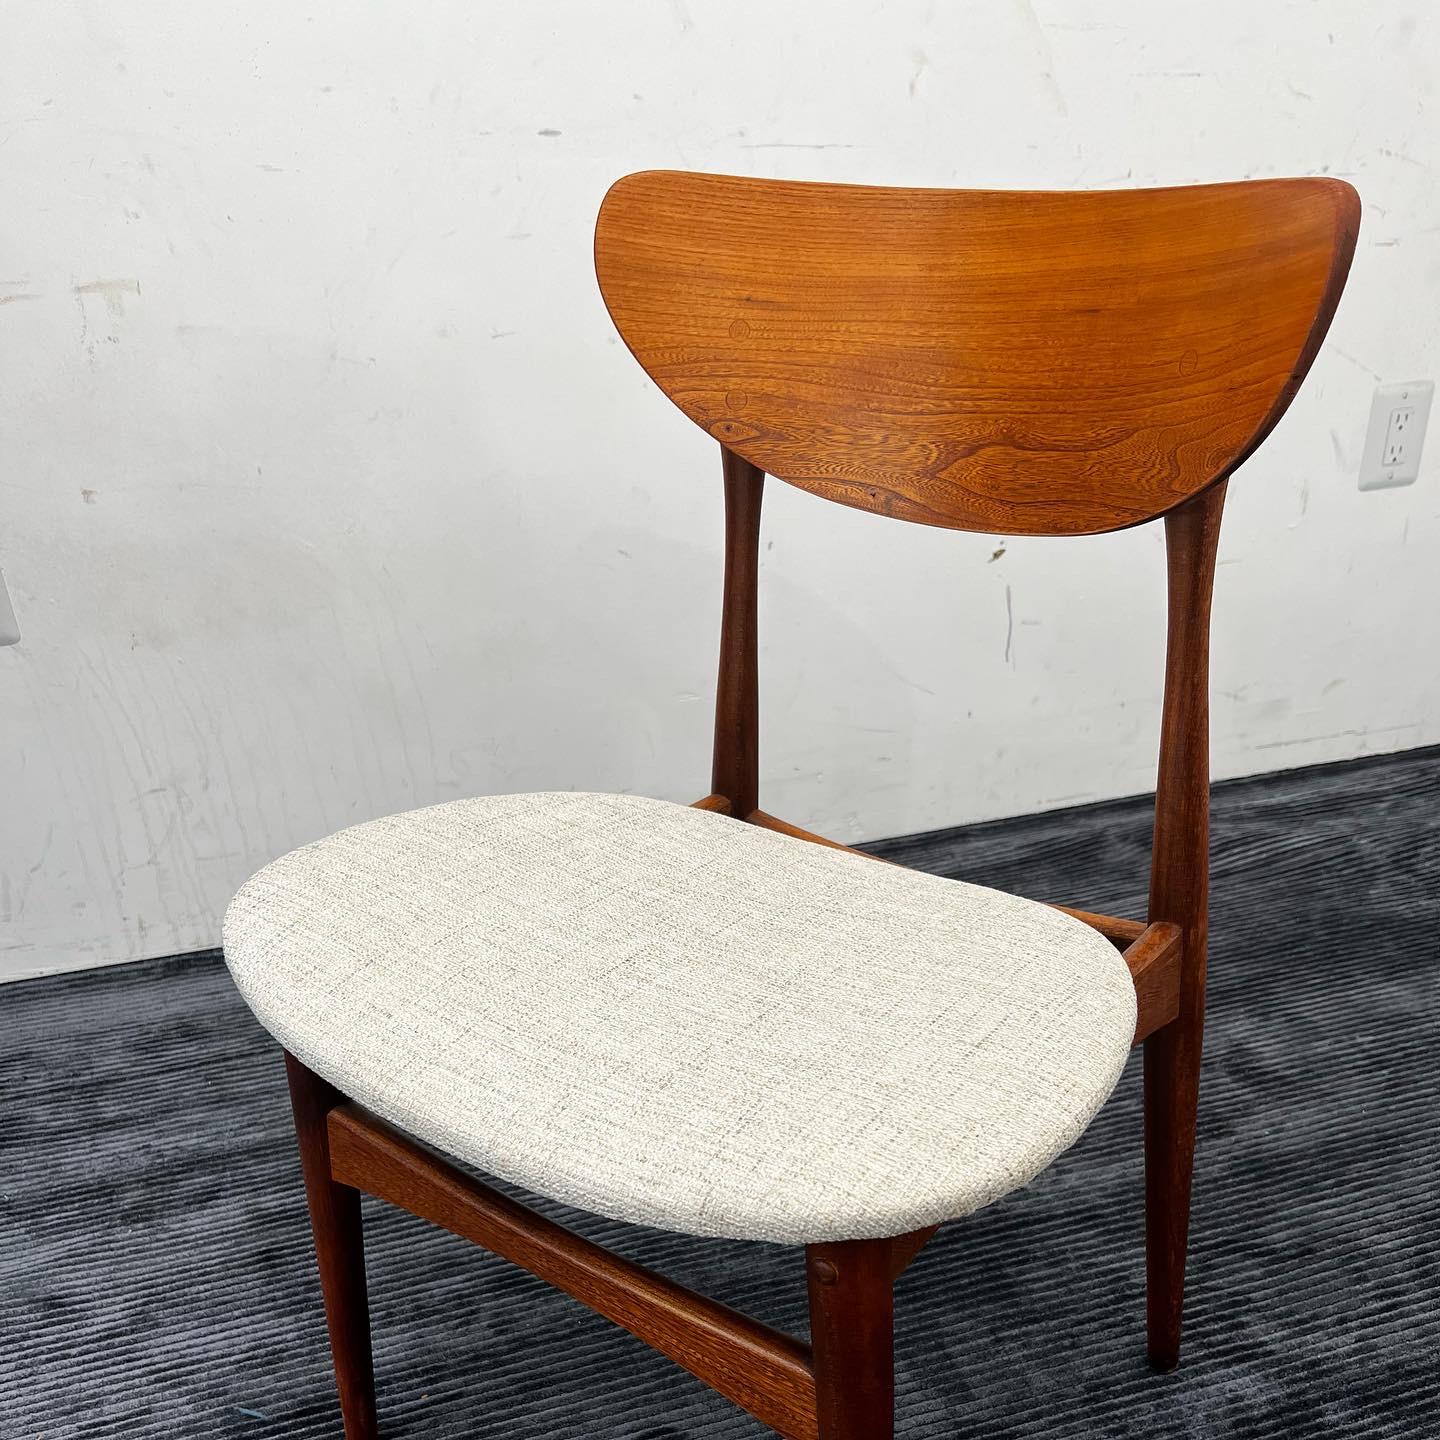 North American 3 Vintage Mid Century Modern Virtue Brothers of California Teak Dining Chairs